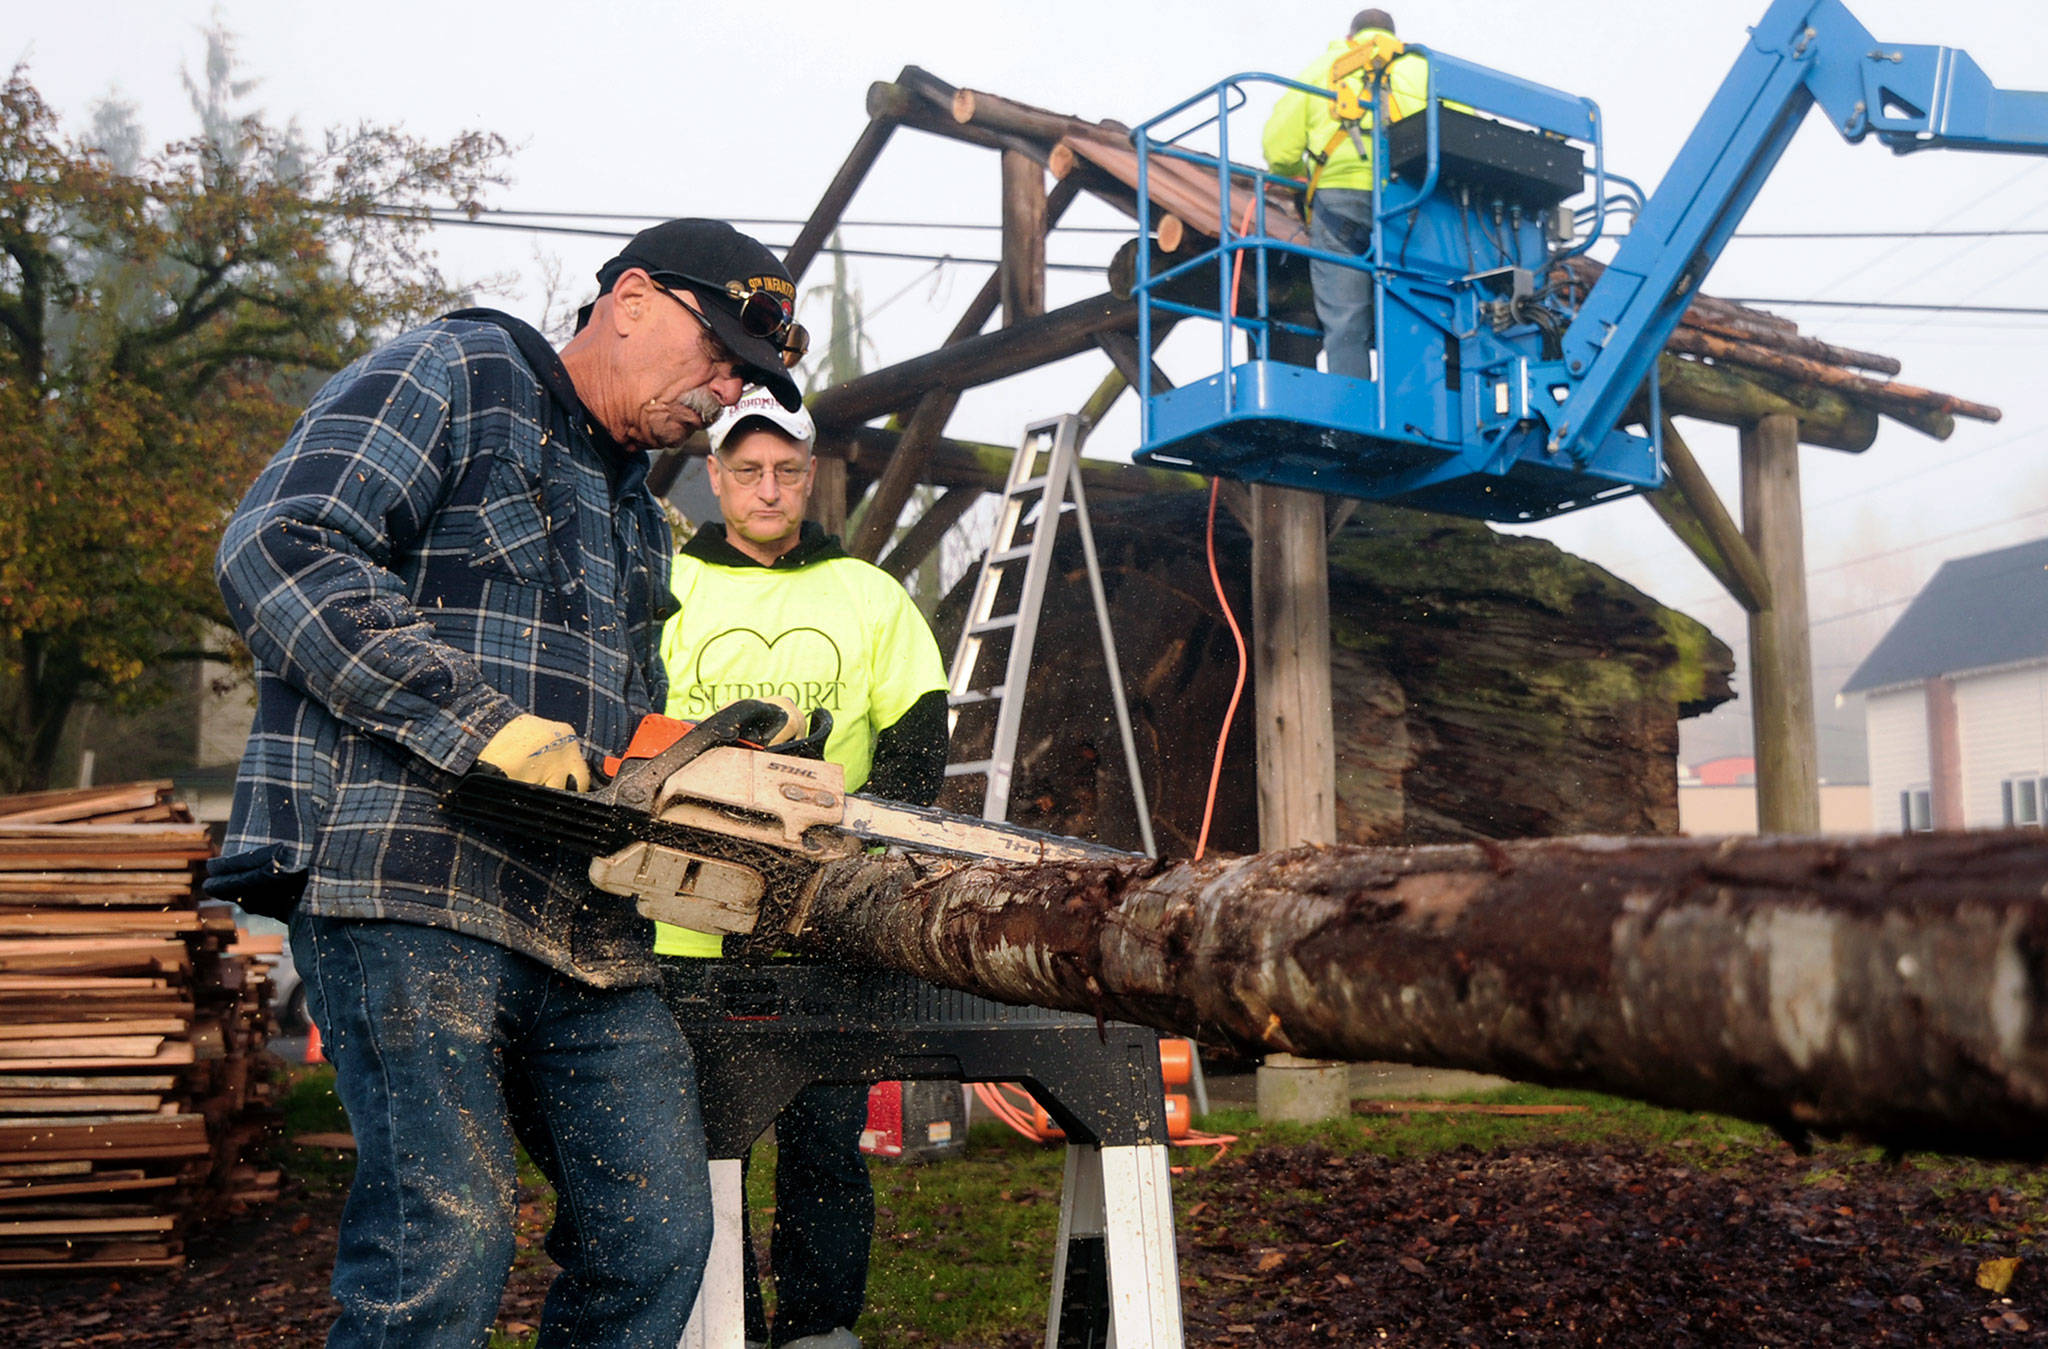 Steve Bates, of Snohomish, uses a chain saw to carve a groove into a log that will become one of the rafters as he and members of the Snohomish Carnegie Foundation tackle the job of replacing the shelter roof over the 1940 Lervick log that has been on display in front of the Carnegie library building on Saturday. (Doug Ramsay / For The Herald)